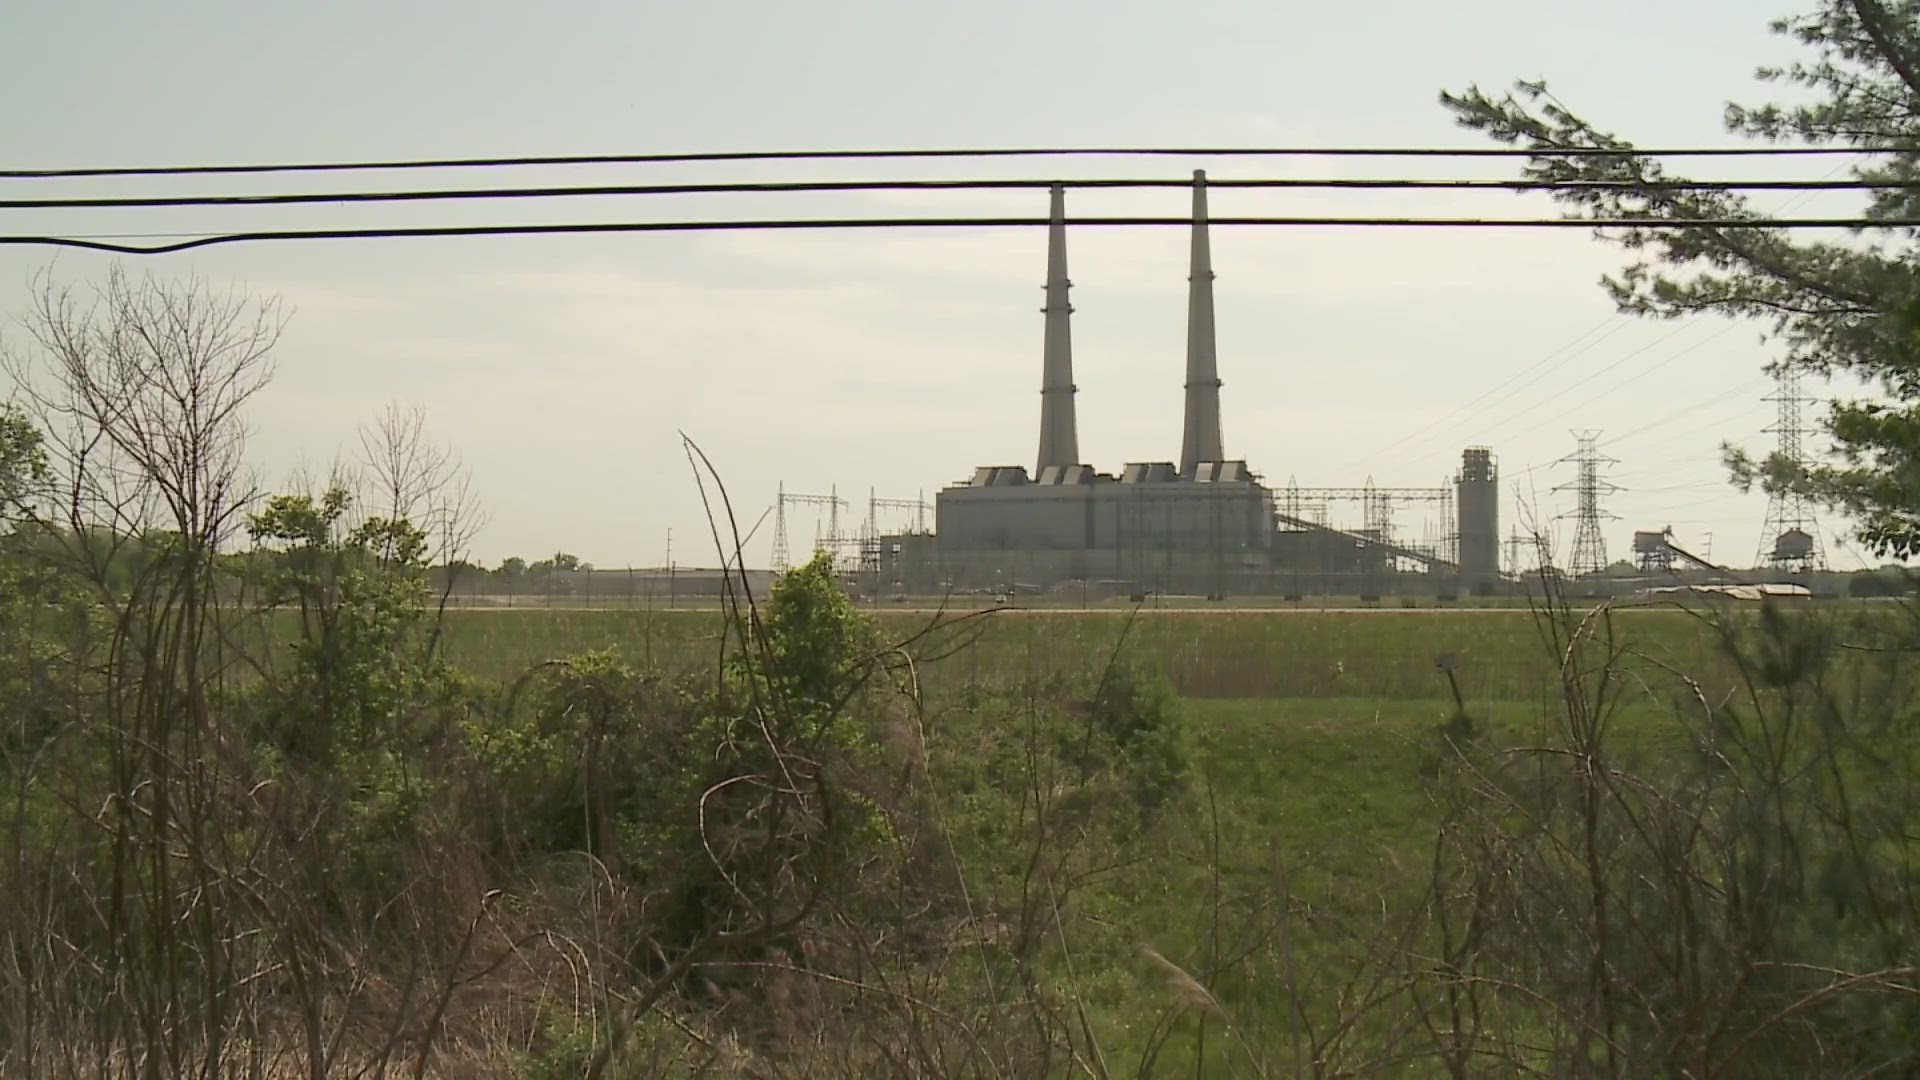 The largest electricity provider in the state is asking regulators for a rate increase.